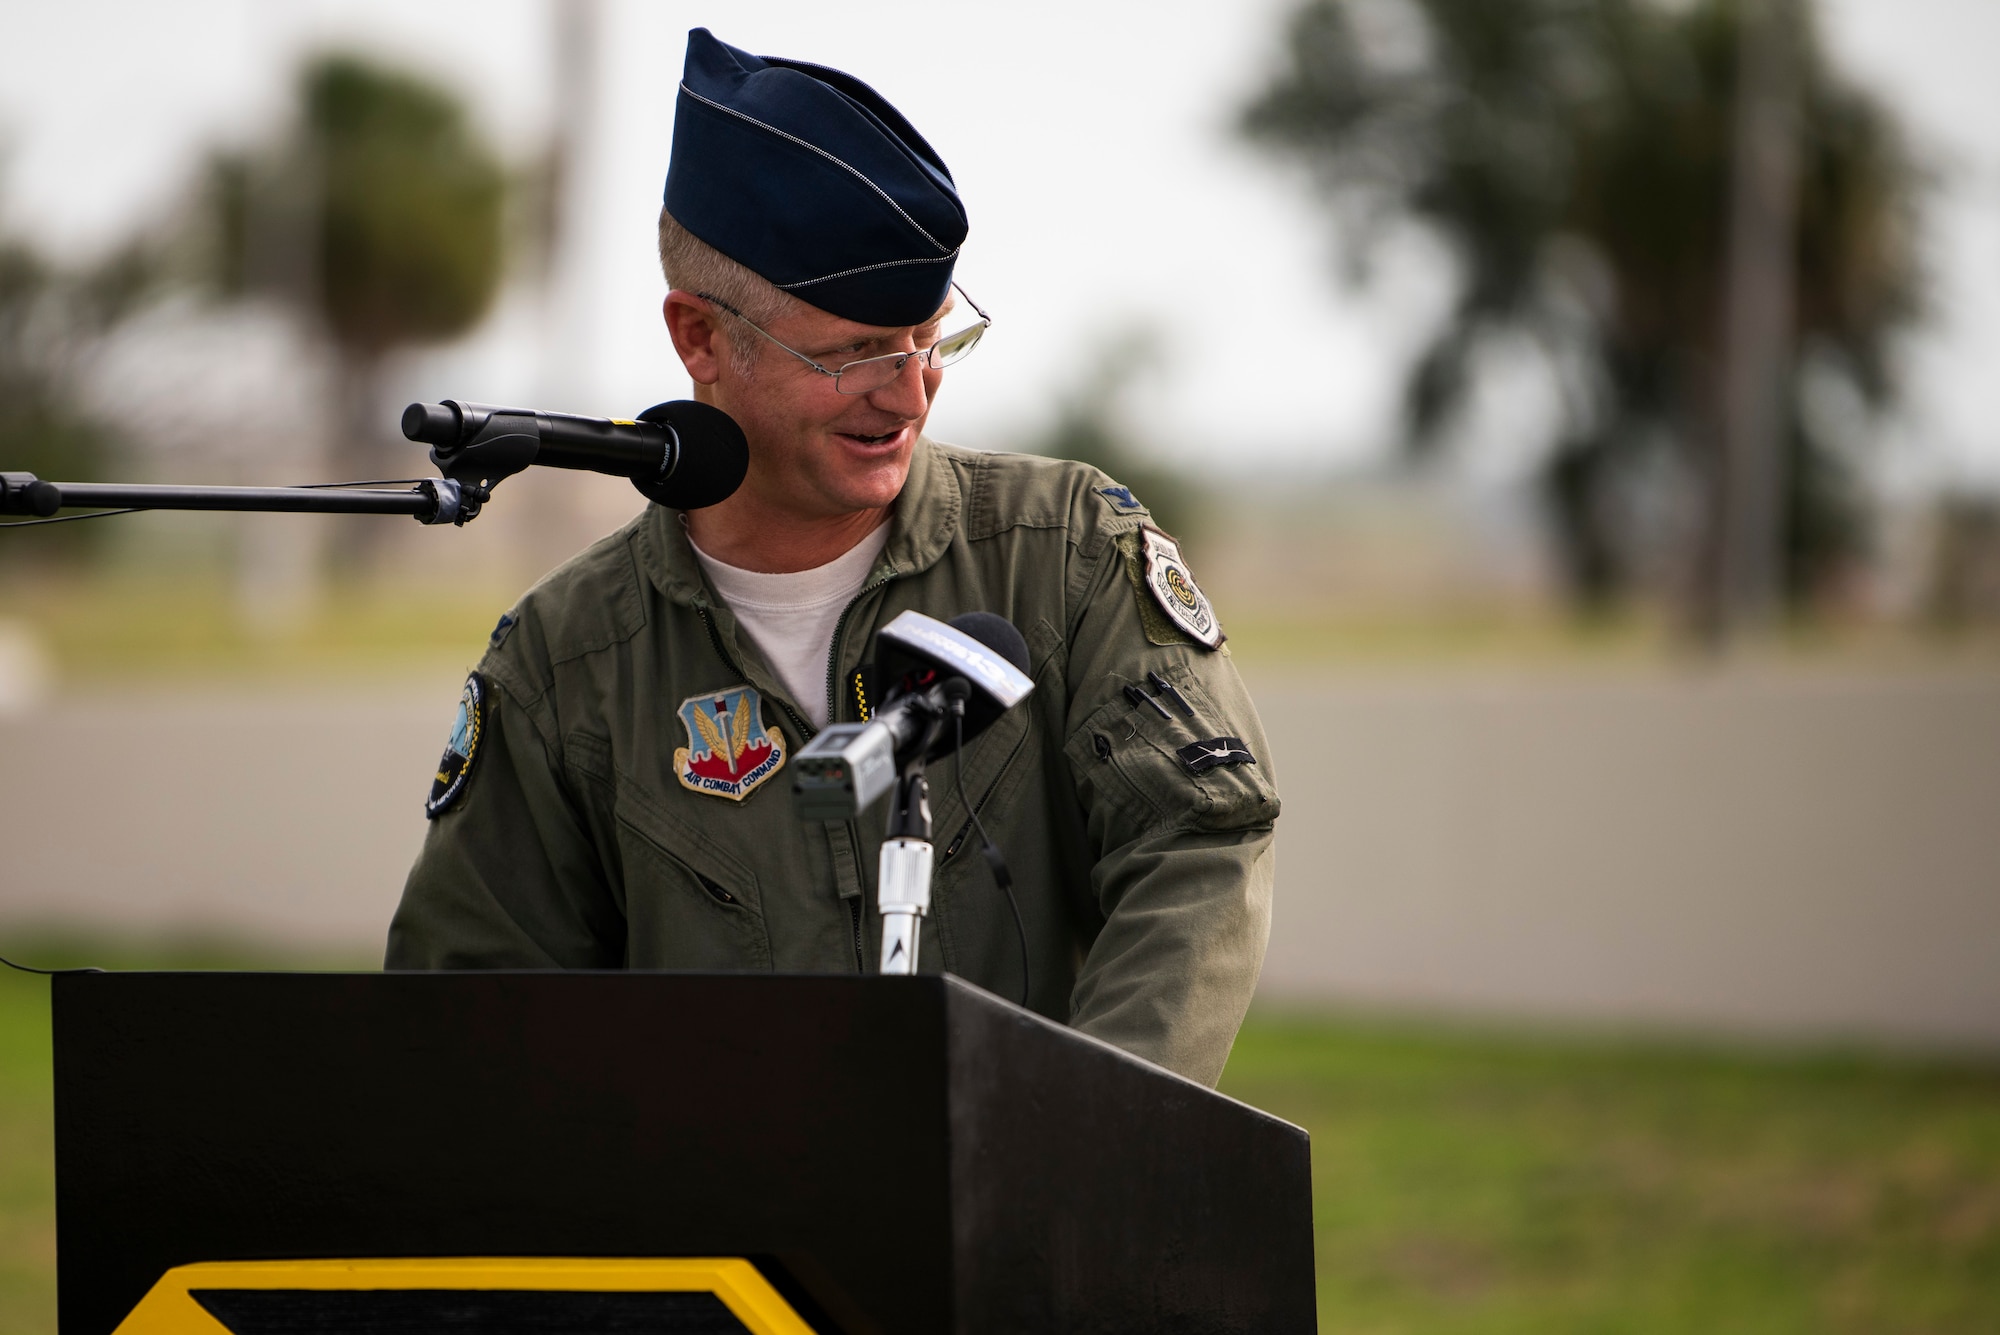 U.S. Air Force Col. Brian Laidlaw, 325th Fighter Wing commander, speaks during a change of command ceremony at Tyndall Air Force Base, Florida, June 26, 2020. Command of the 325th FW transferred from Laidlaw to U.S. Air Force Col. Greg Moseley. (U.S. Air Force photo by Tech. Sgt. Clayton Lenhardt)